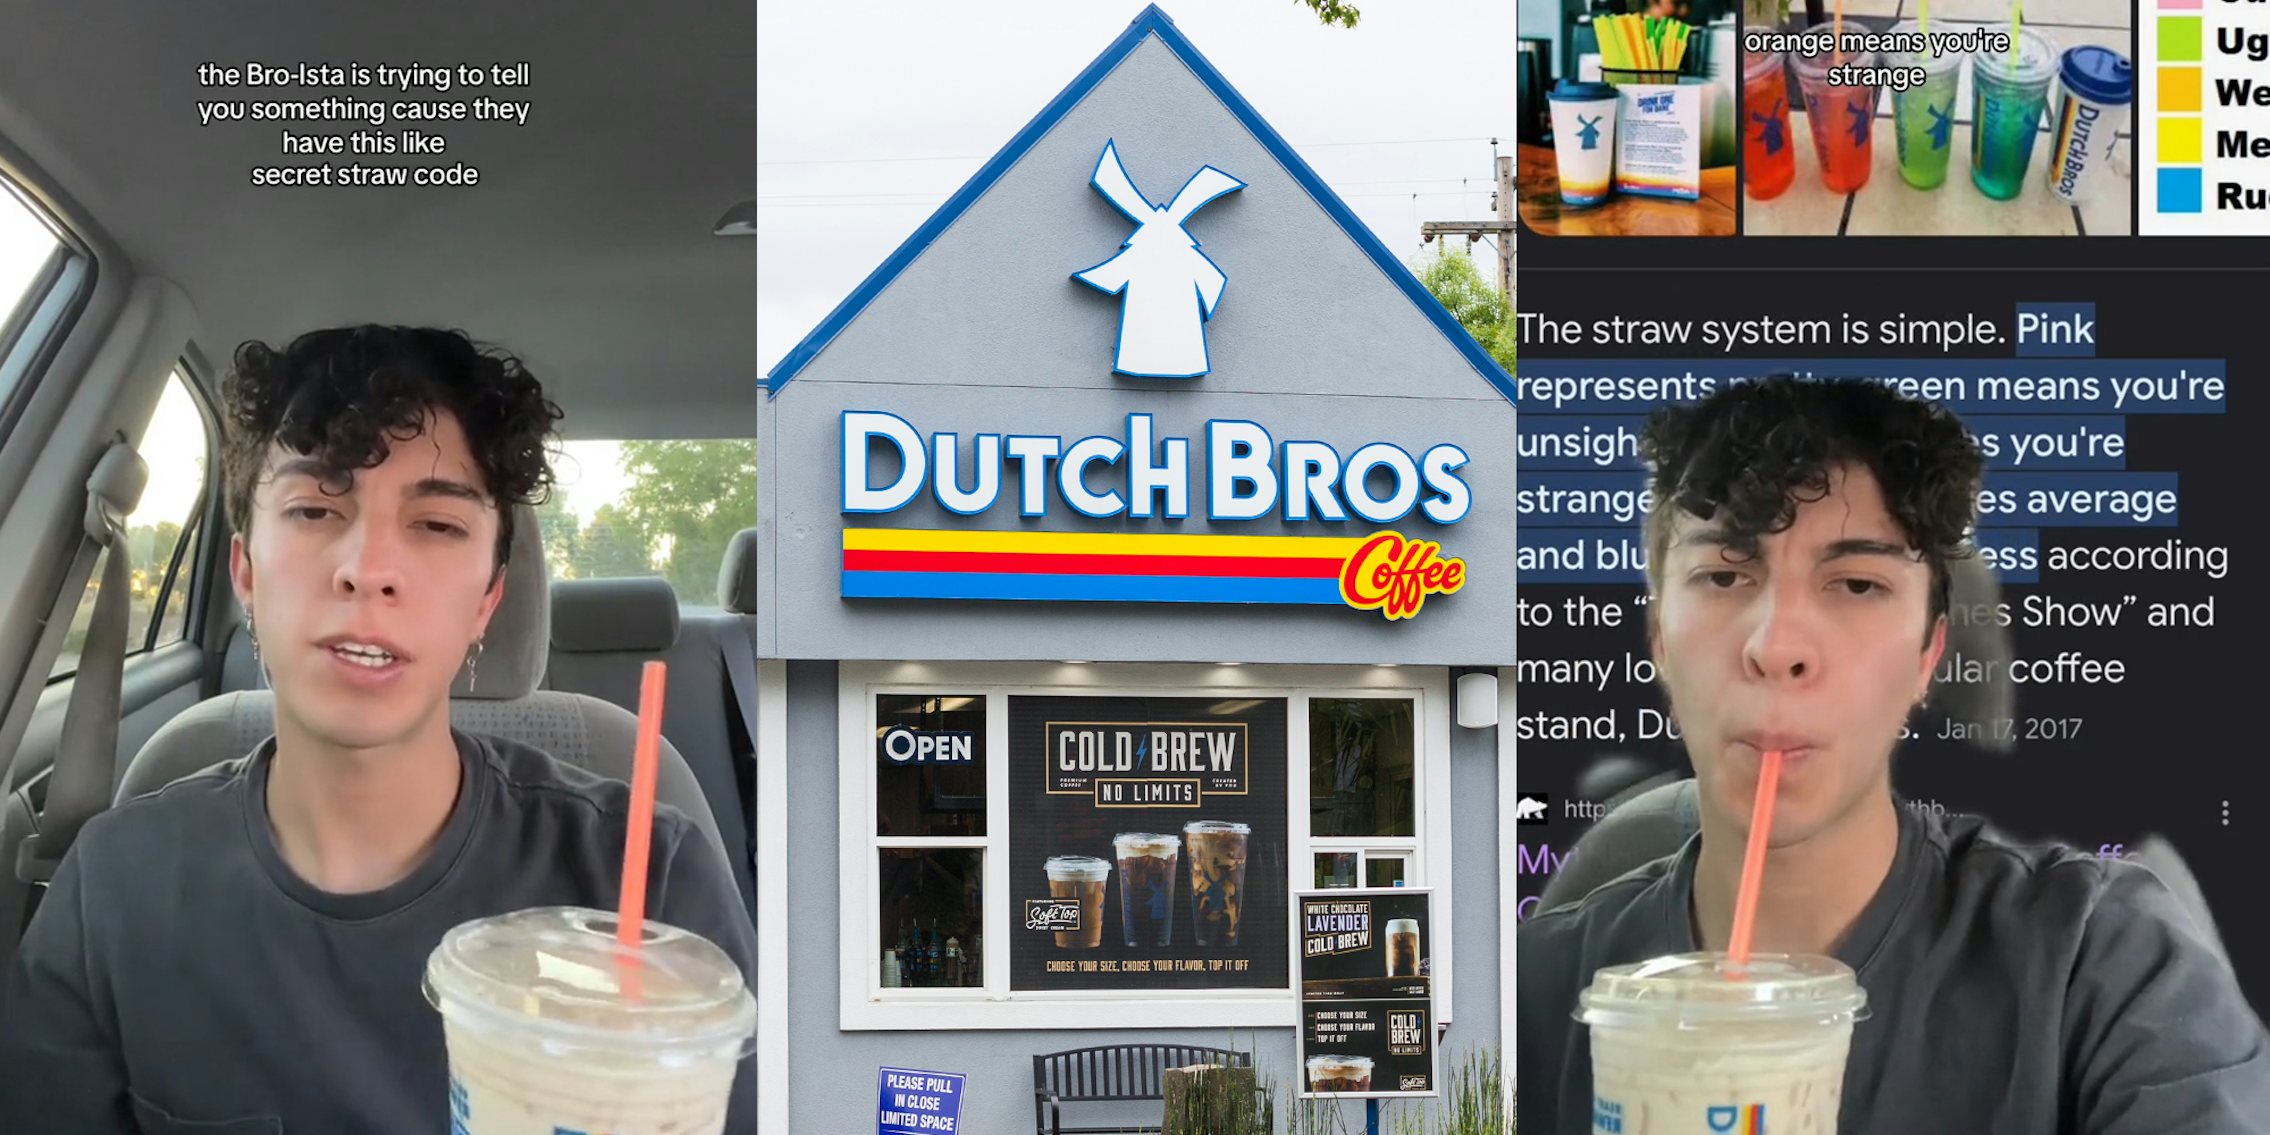 Dutch Bros customer speaking with drink with caption 'the Bro-Ista is trying to tell you something cause they have like this secret straw code' (l) Dutch Bros building with sign (c) Dutch Bros customer greenscreen TikTok speaking over straw codes with drink with caption 'orange means you're strange' (r)